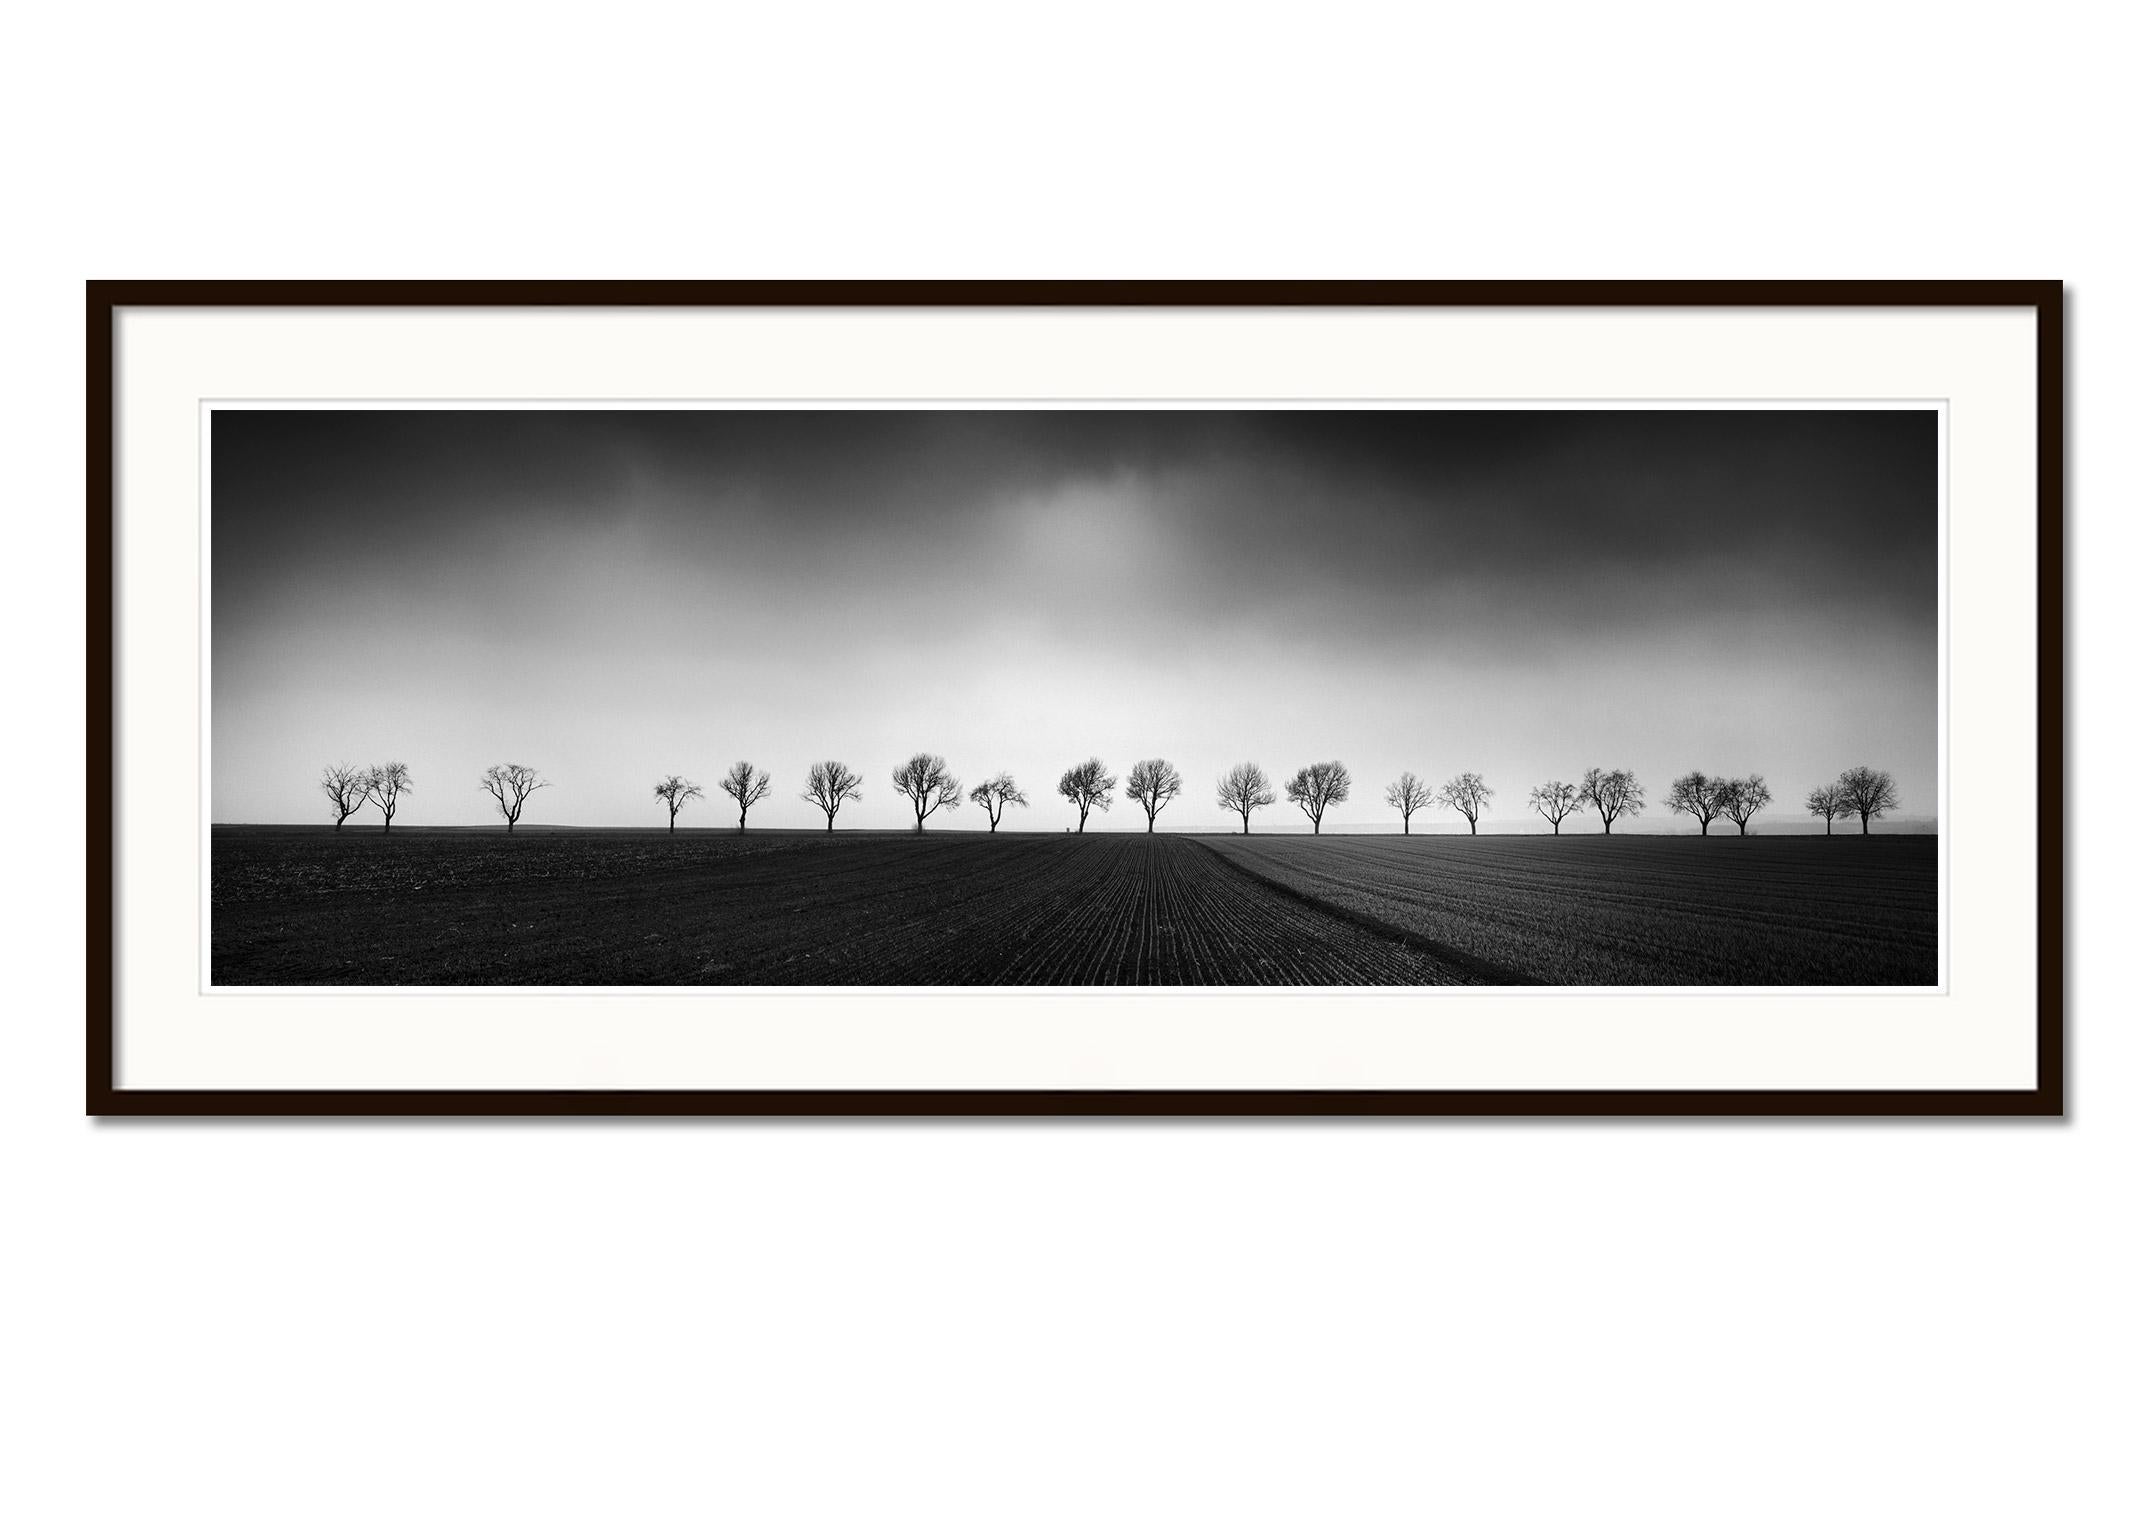 Twenty Cherry Trees, Avenue, black & white panorama, landscape, art photography - Gray Black and White Photograph by Gerald Berghammer